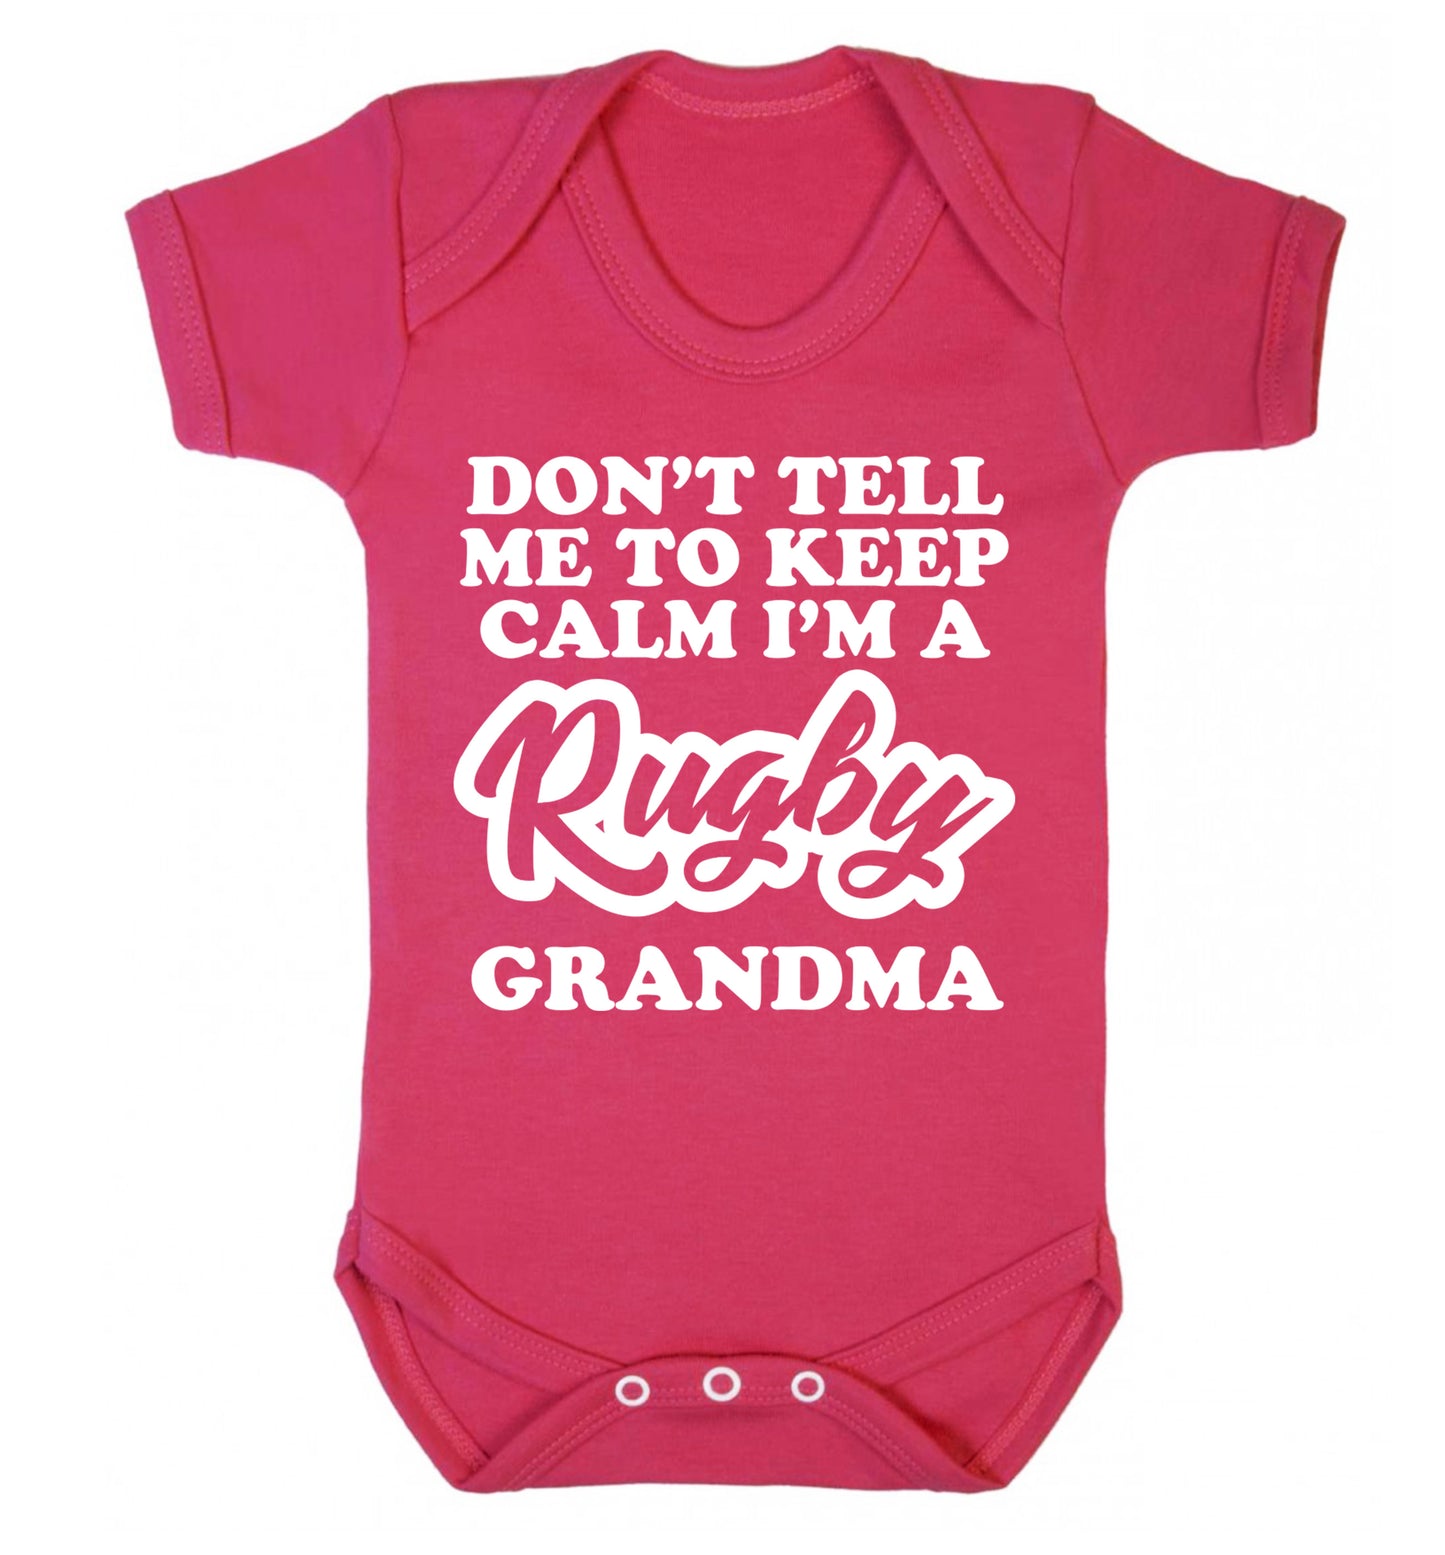 Don't tell me to keep calm I'm a rugby grandma Baby Vest dark pink 18-24 months